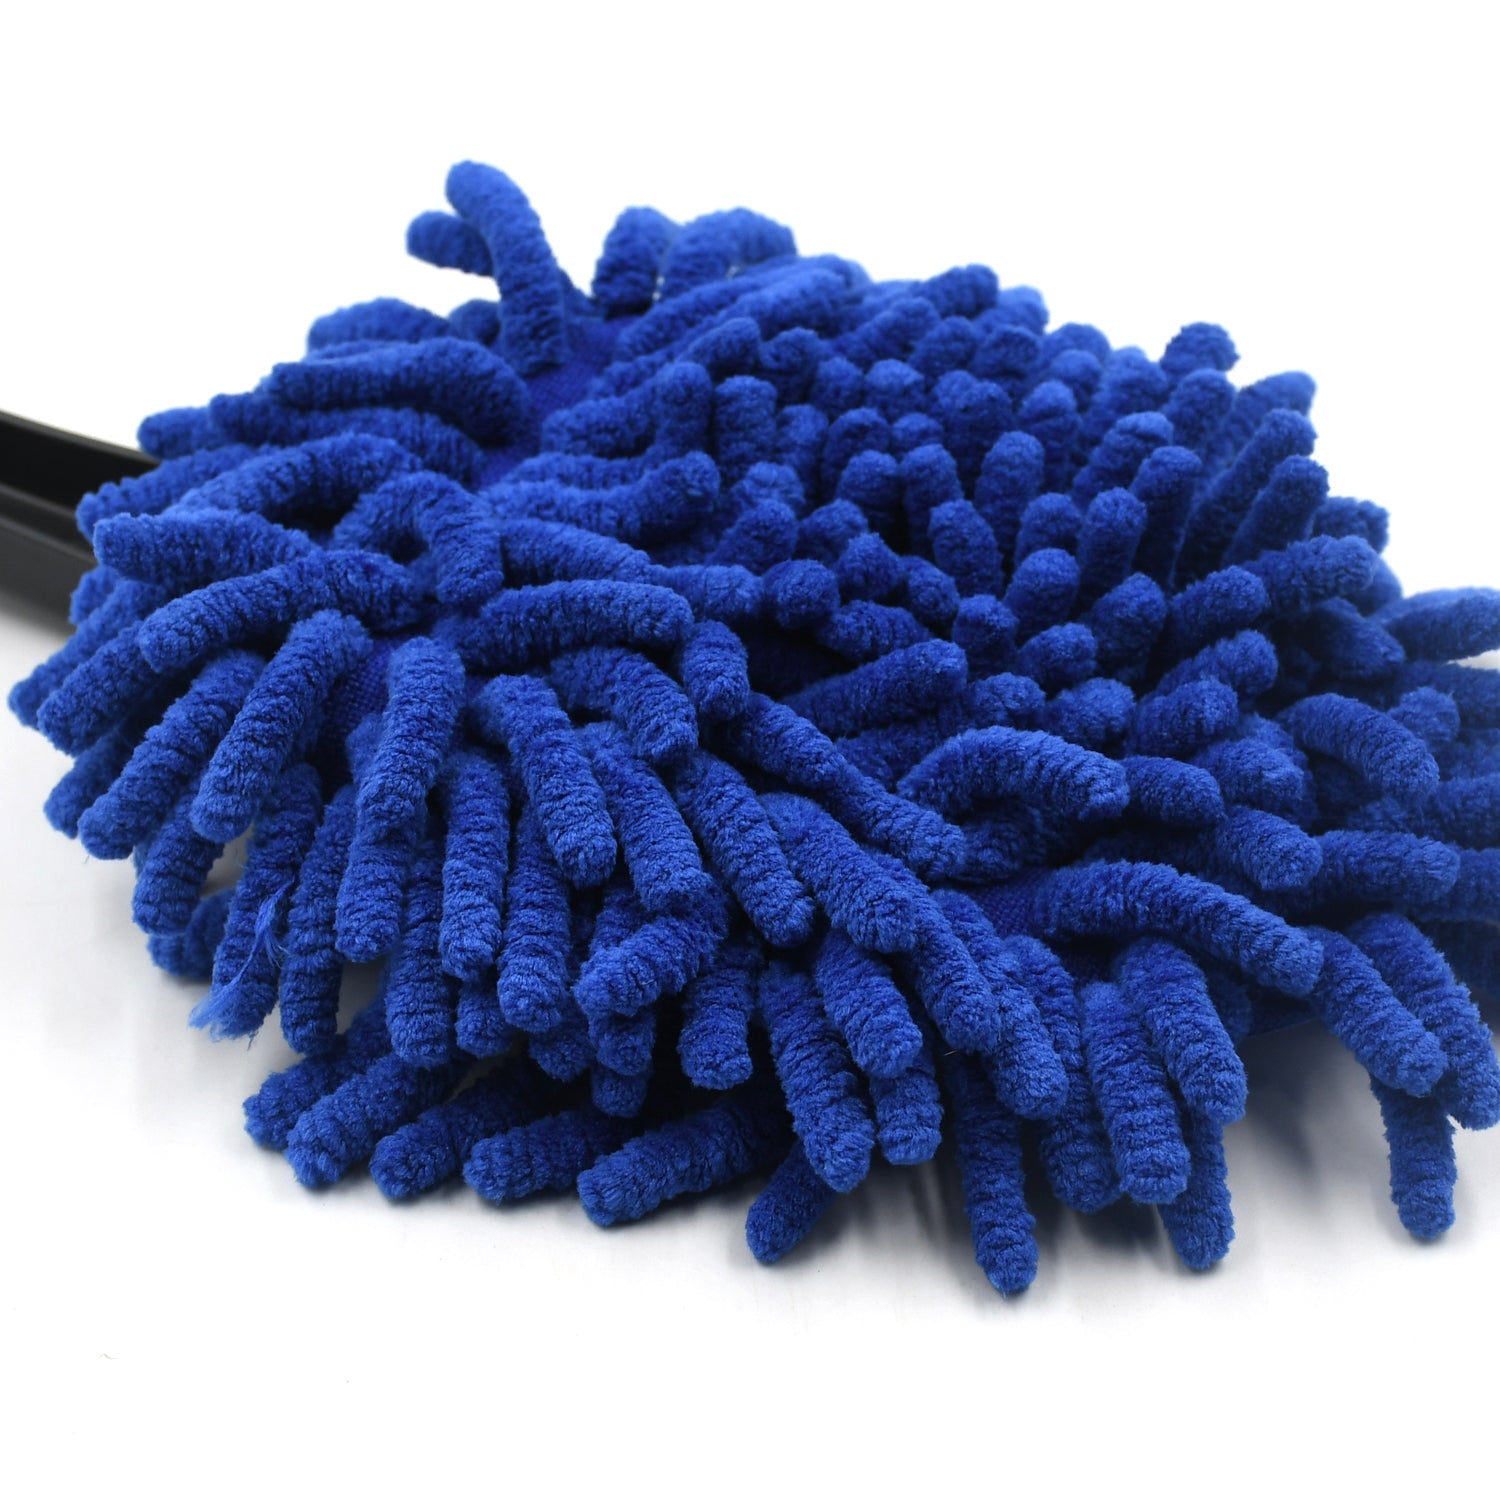 4098 Car Wash Cleaning Brush Microfiber Dusting Tool Duster Dust Mop Home Cleaning For Cleaning and Washing of Dirty Car Glasses, Windows and Exterior.